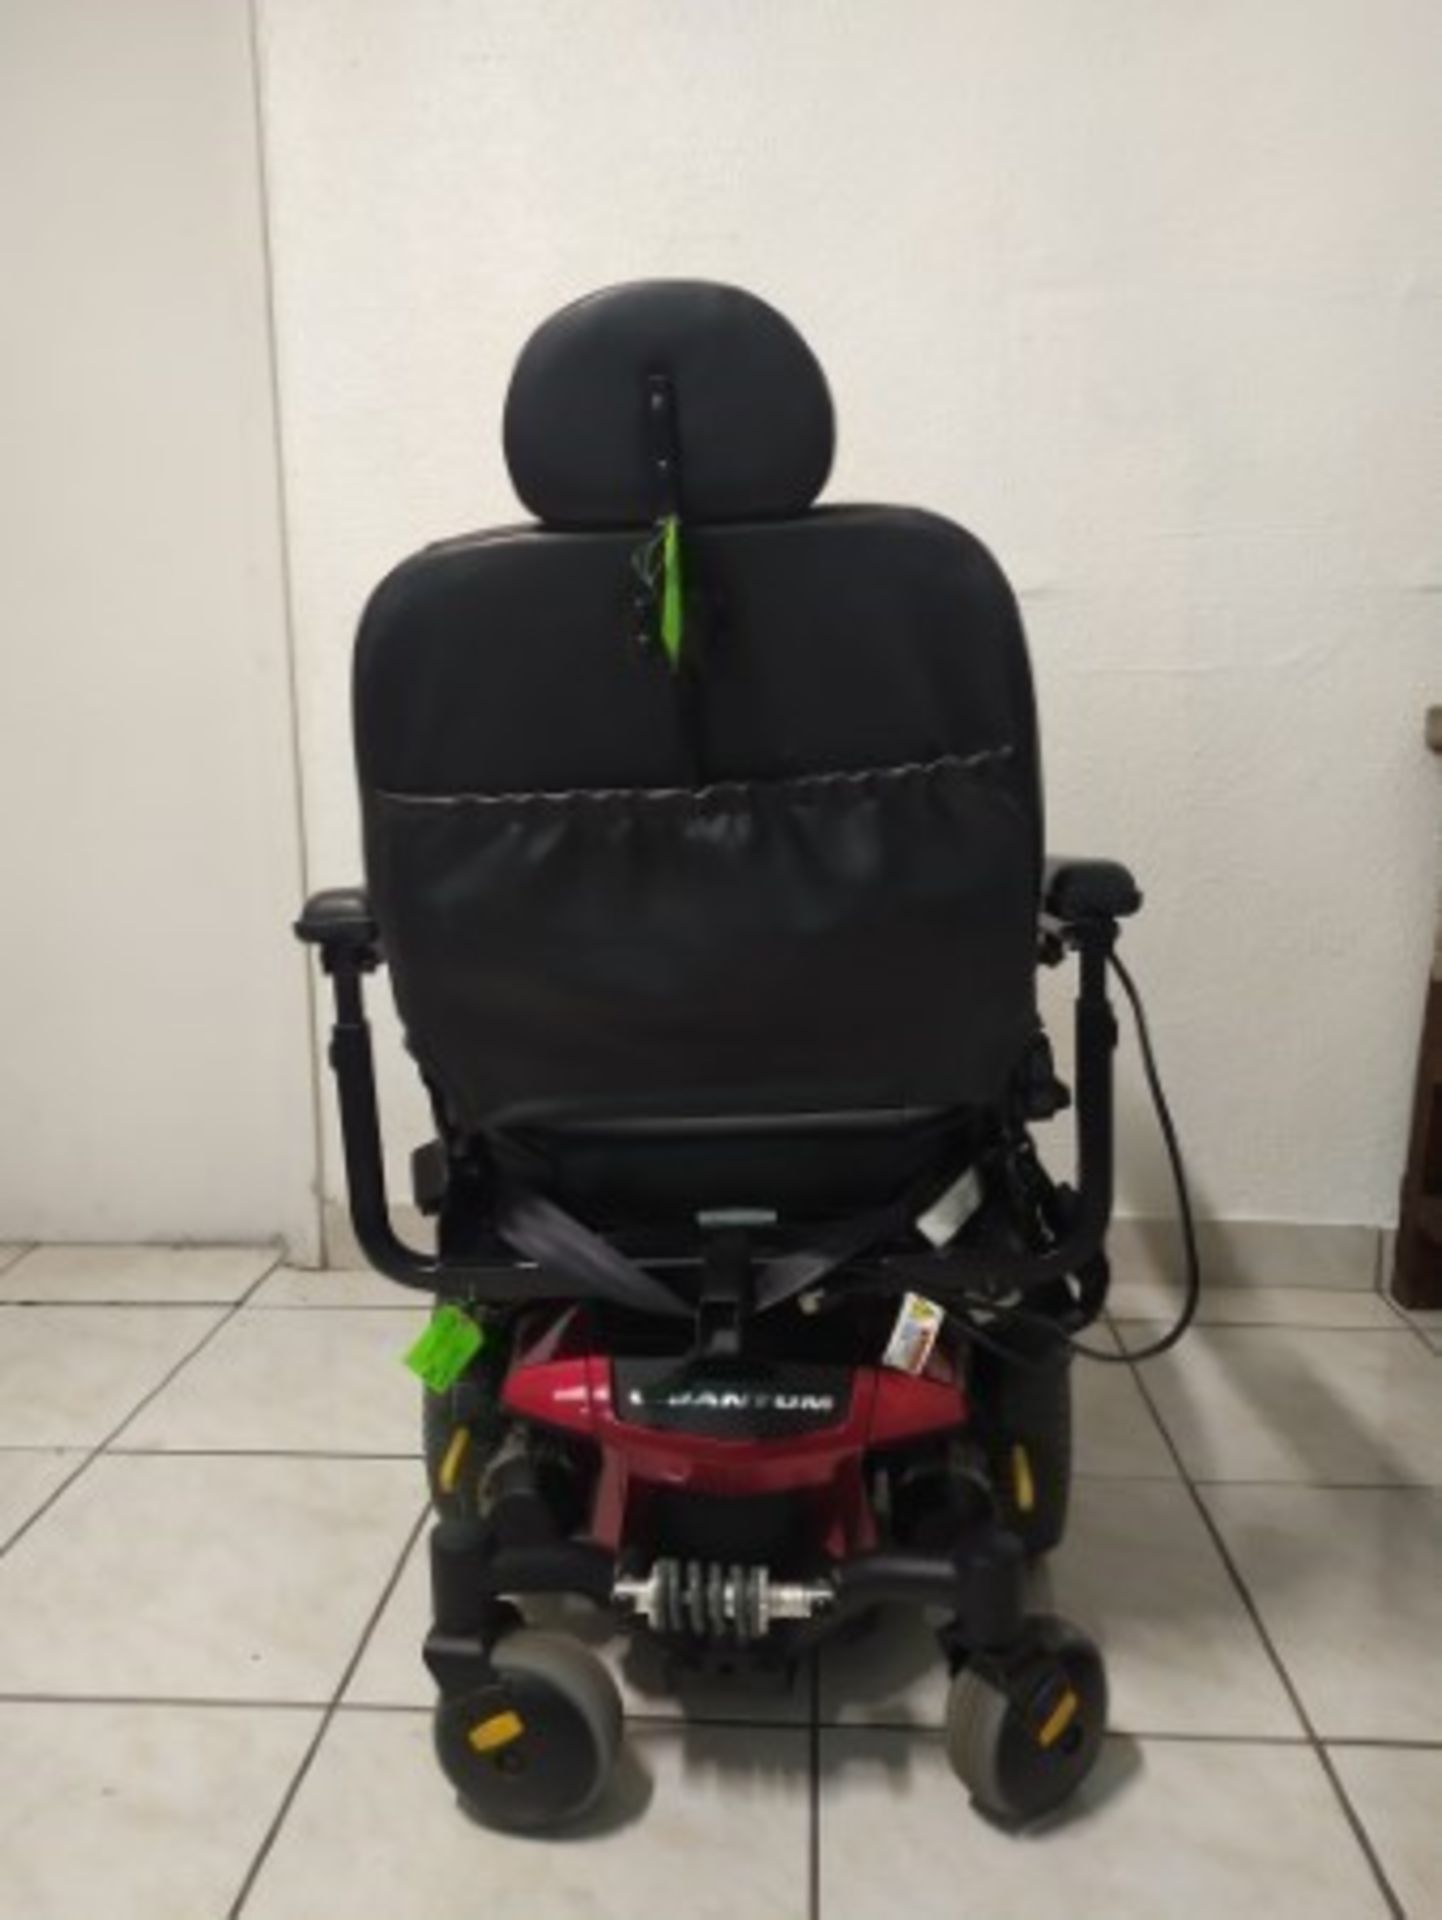 2017 QUANTUM Q6 EDGE 6-WHEEL POWER CHAIR - RED - 400LB CAPACITY - SERIAL No. JB622617126020 (CHARGER - Image 4 of 4